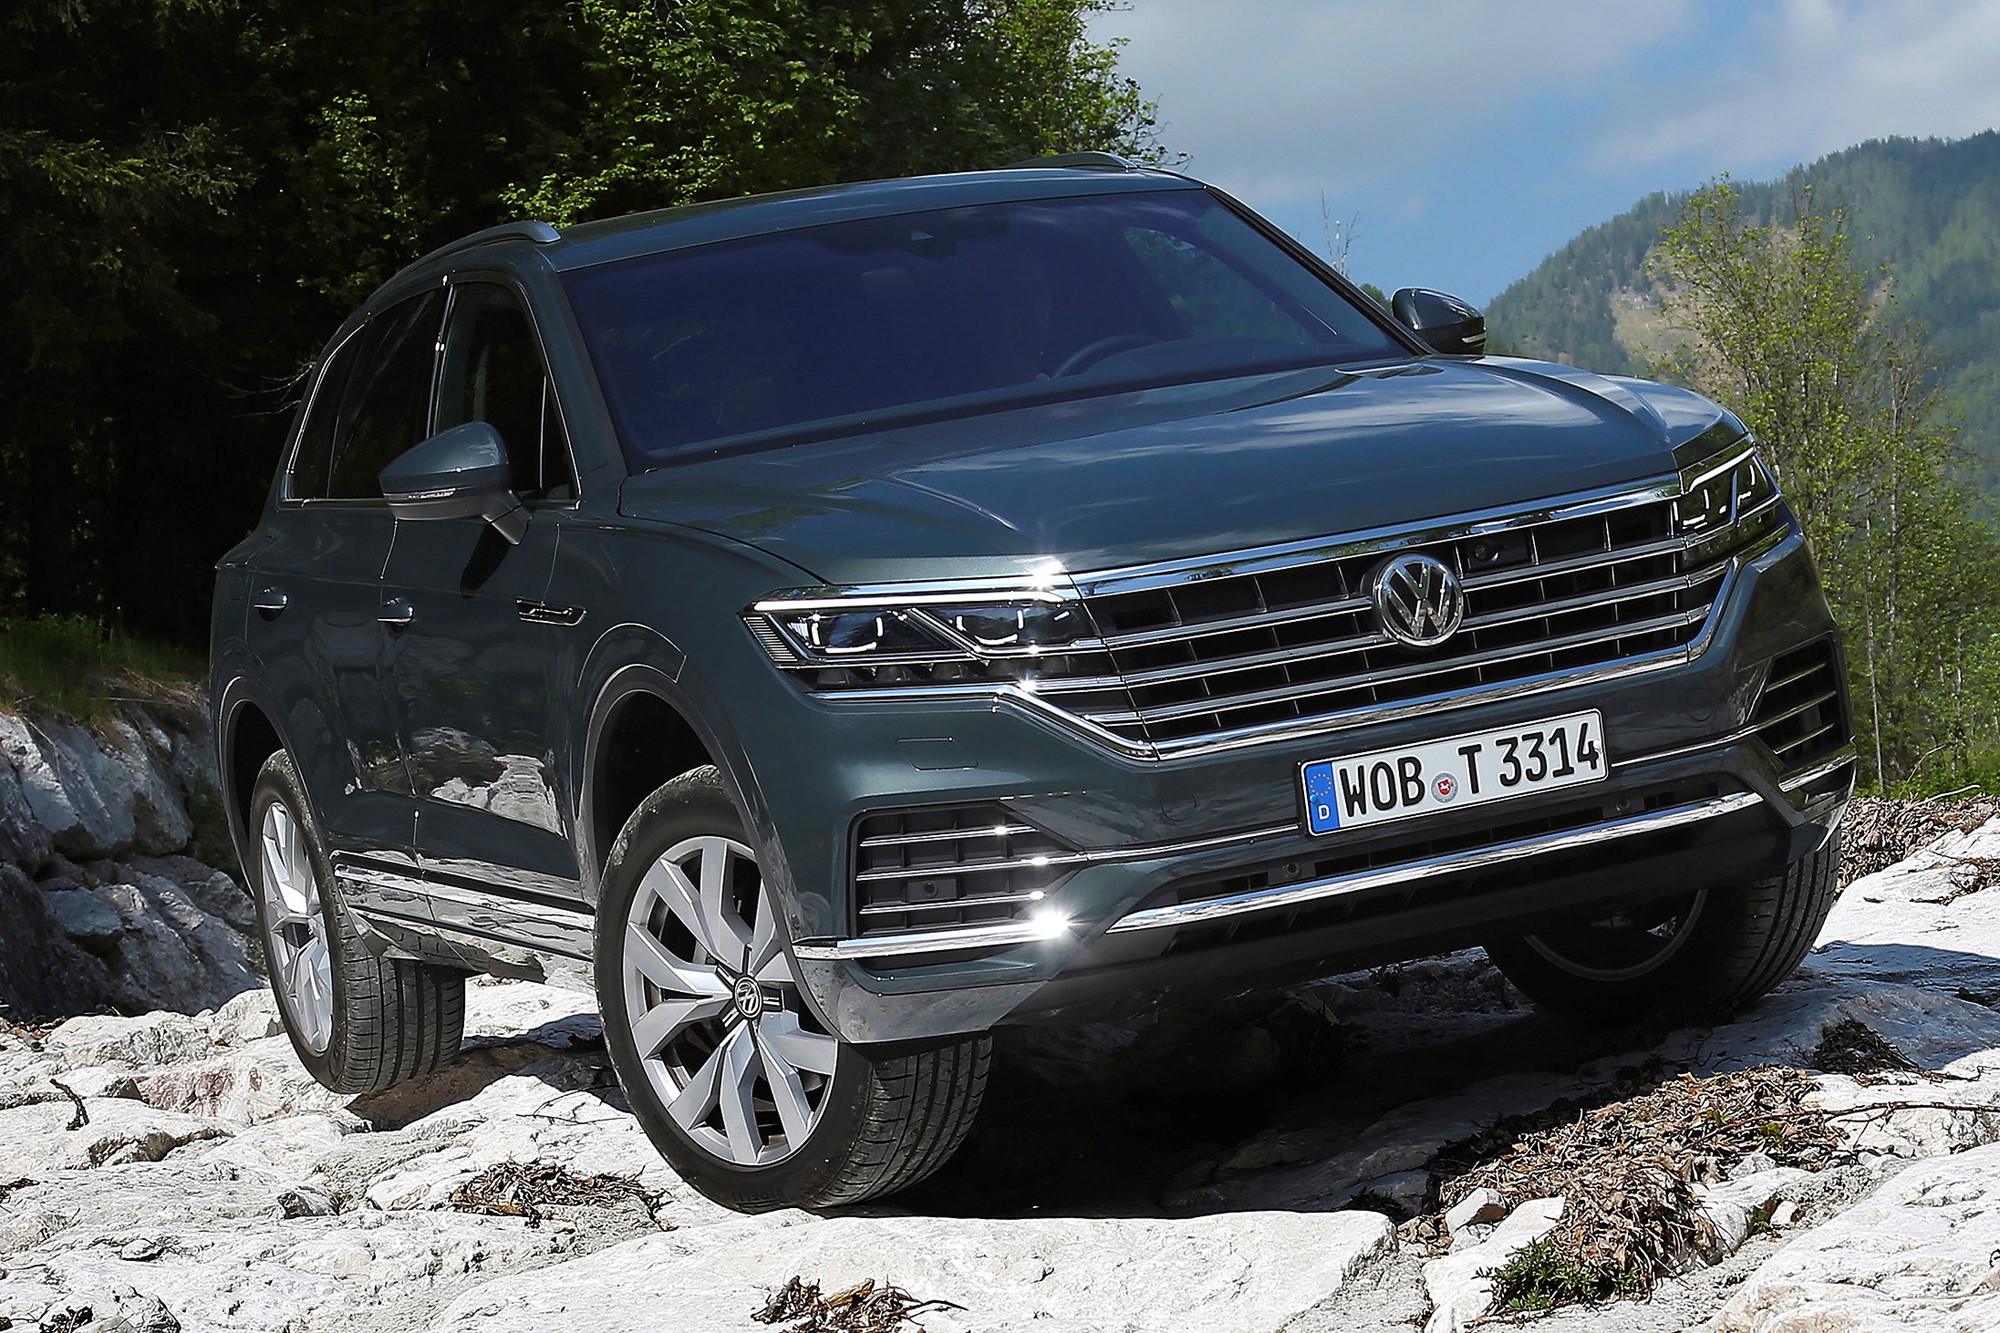 VW Touareg Turns 20 This Year, Celebrates With Special-Edition Model